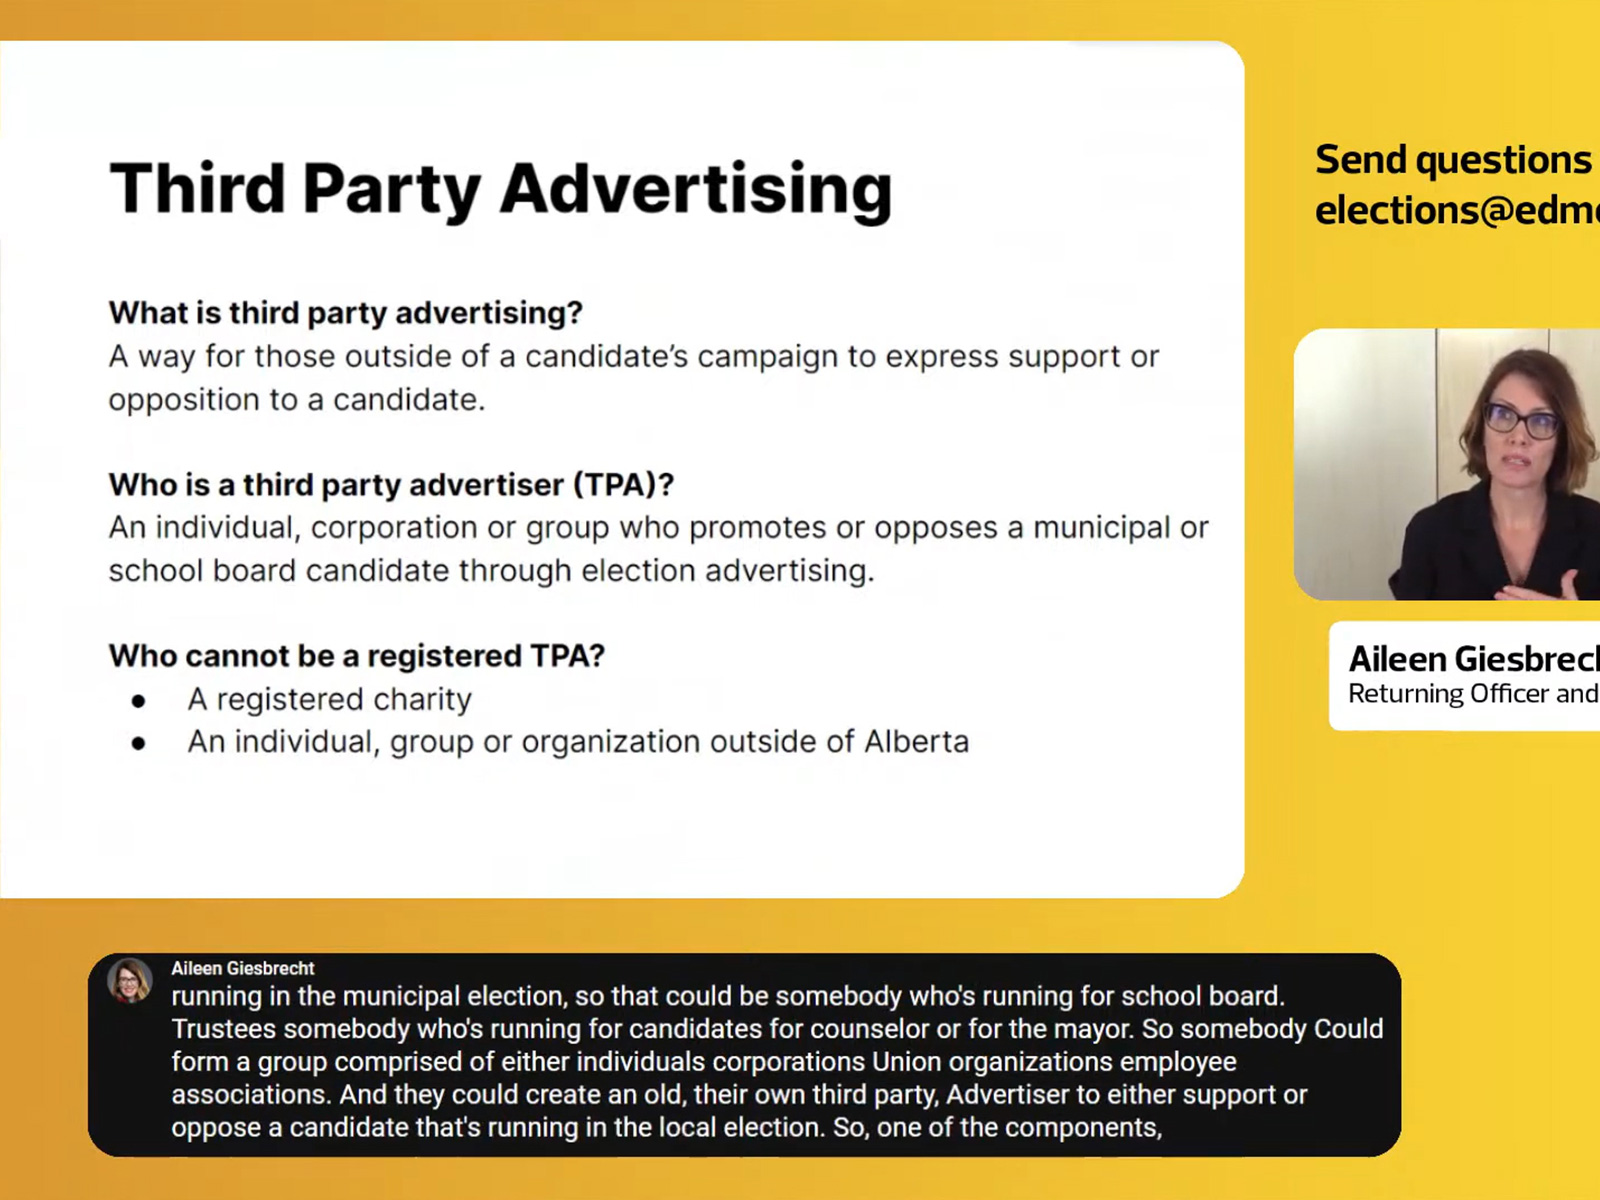 #6 Third Party Advertising